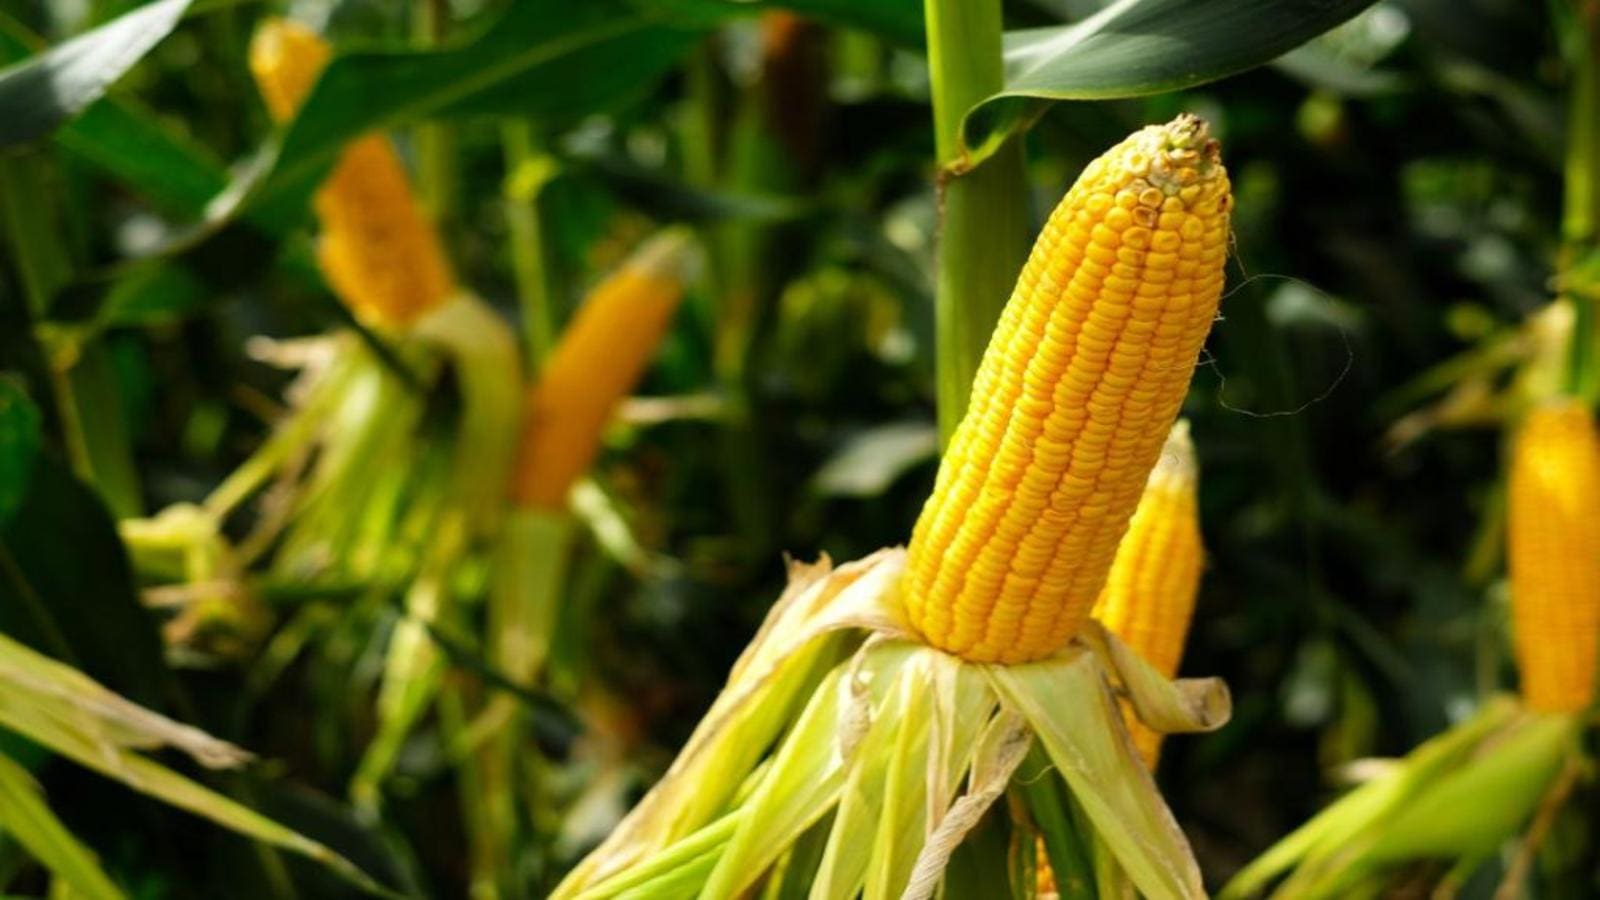 Attractive prices lure Brazilian farmers to corn cultivation, production expected to hit 105m tonnes